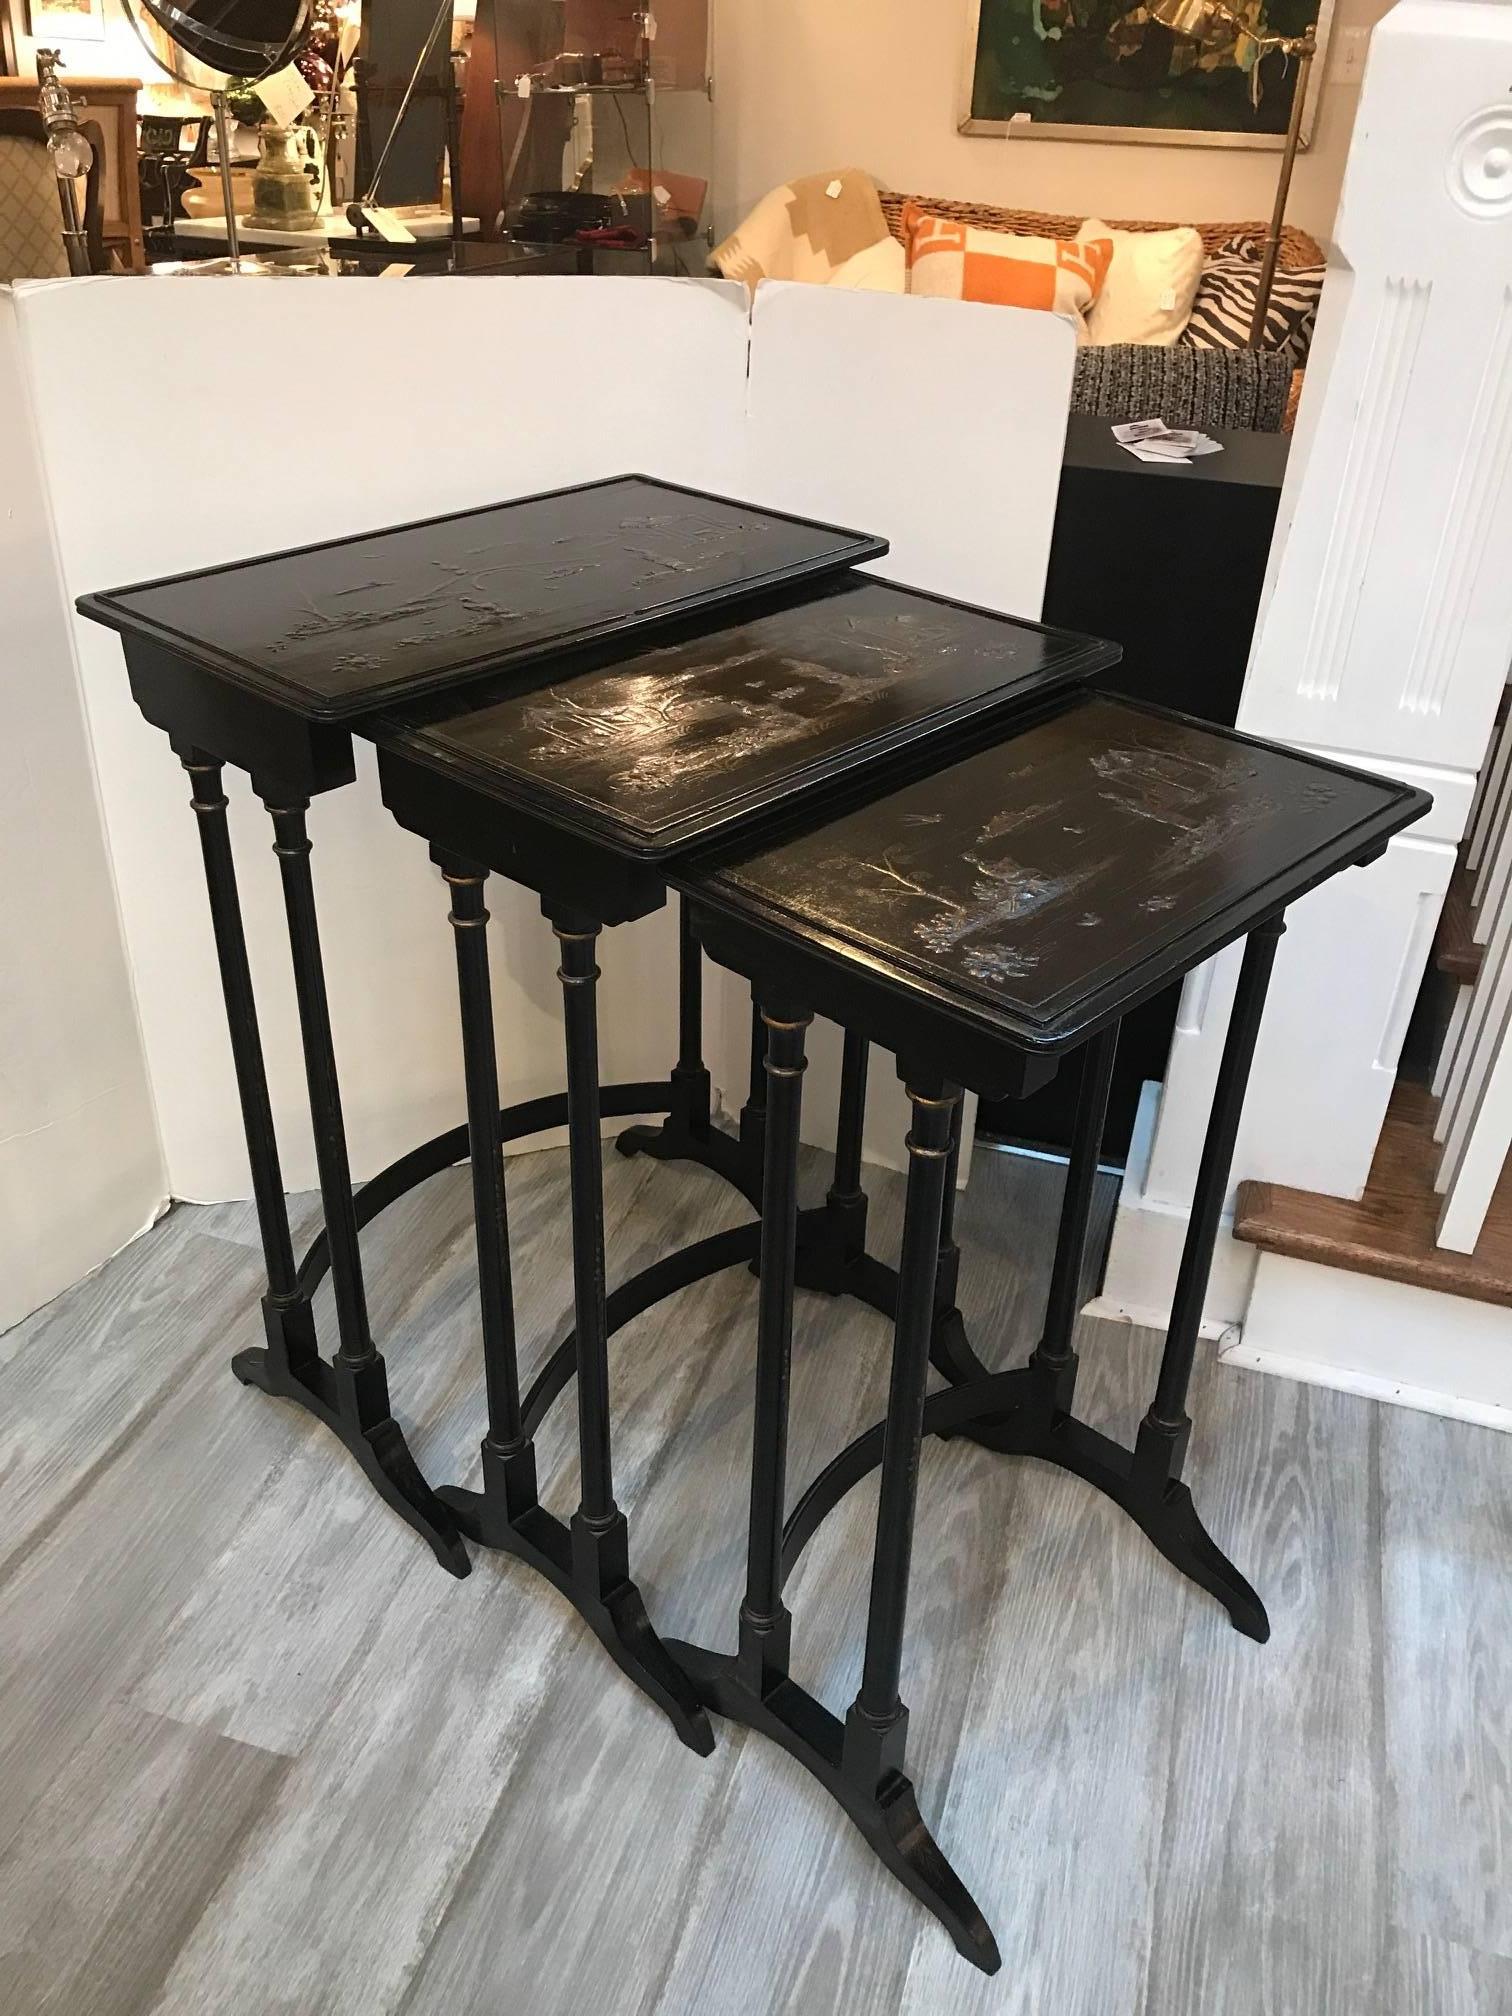 Three Classic English Regency style chinoiserie nesting tables. The largest with two smaller tables that fit neatly into one another. The finish is a japanned black background with gold scenes of Asian inspires people and landscapes, early 20th